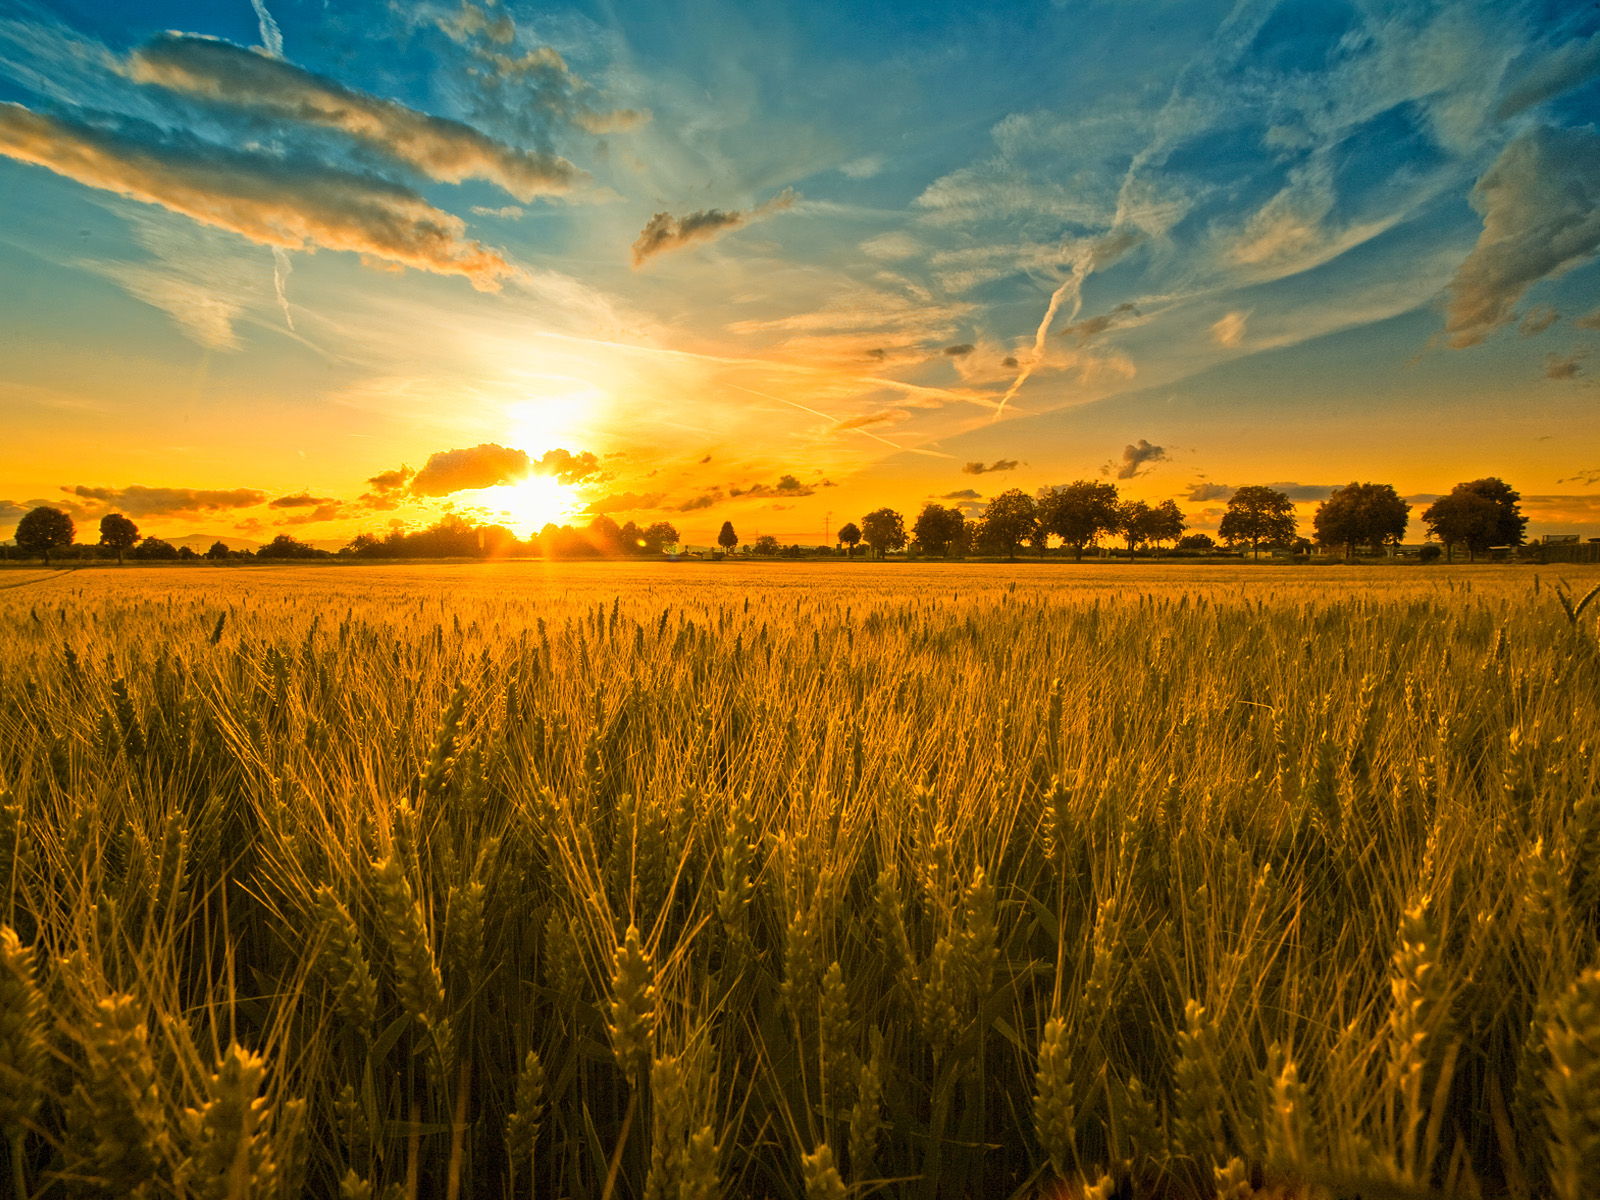 In the Alter Rebbe's maamer on this week's Torah portion, he introduces his famous allegory about the king in the field. The narrative symbolizes the ...